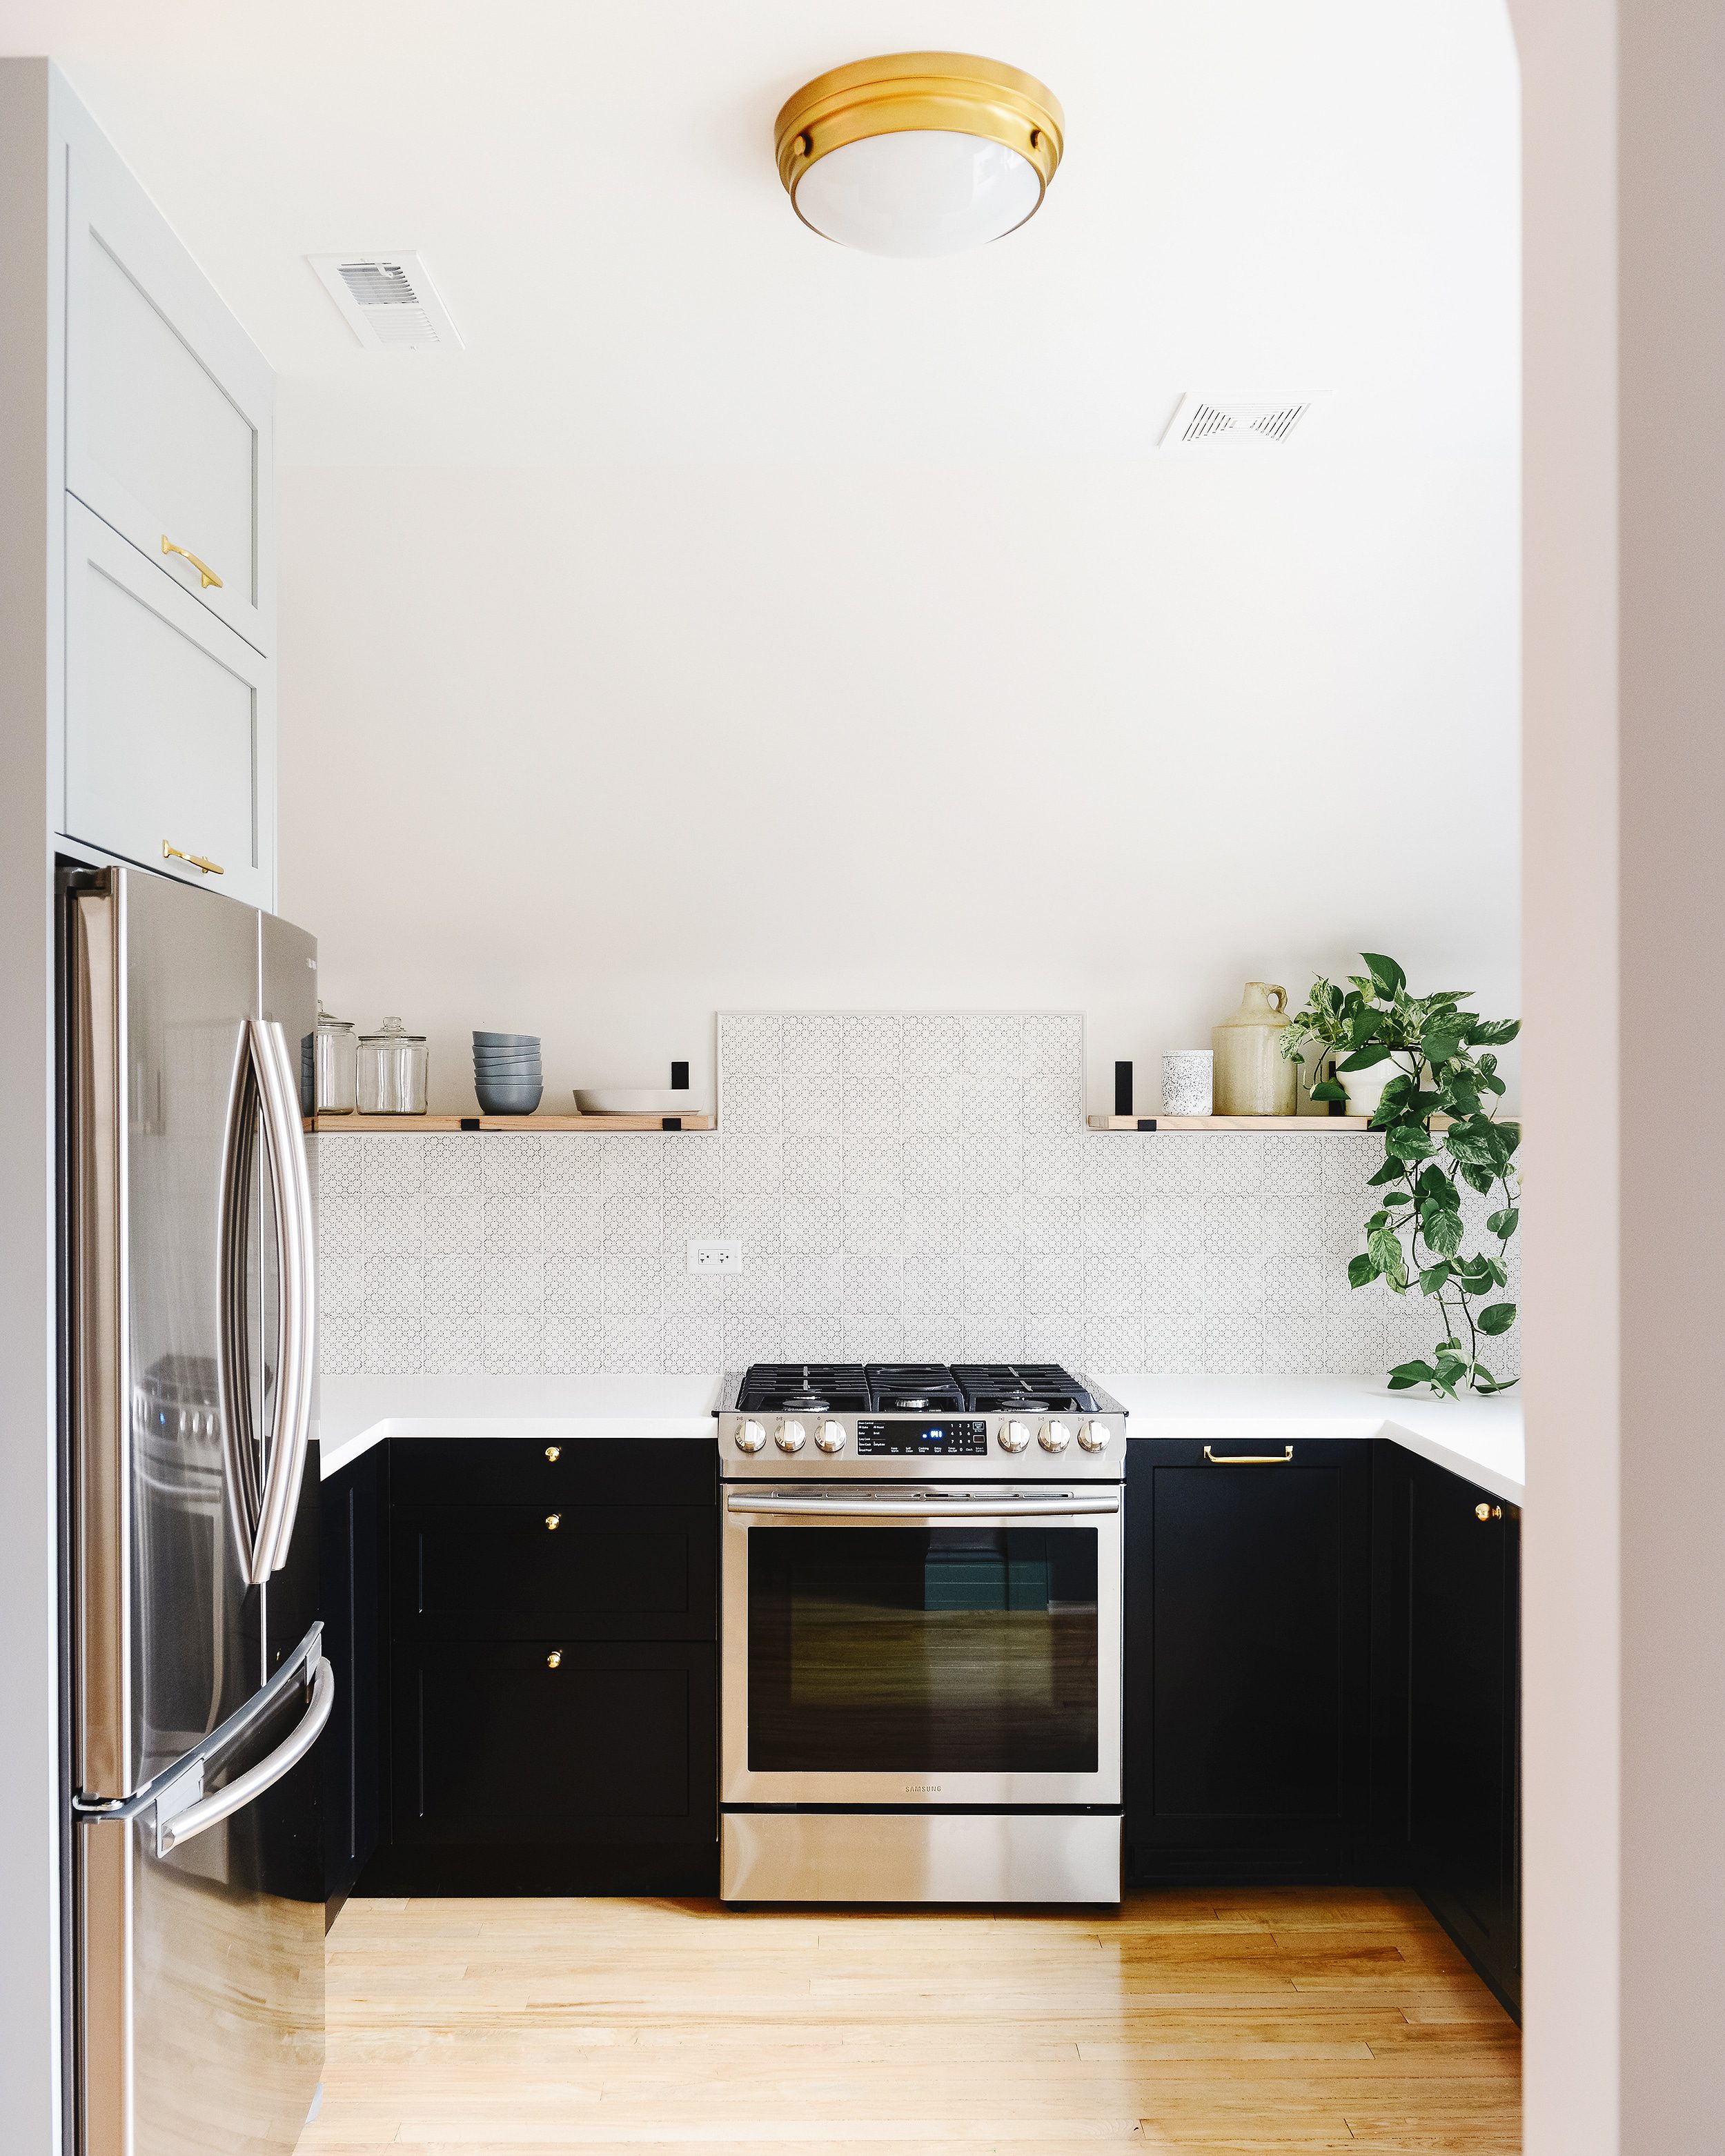 A small kitchen with black base cabinets, square tile, brass hardware and open shelving. | via Yellow Brick Home